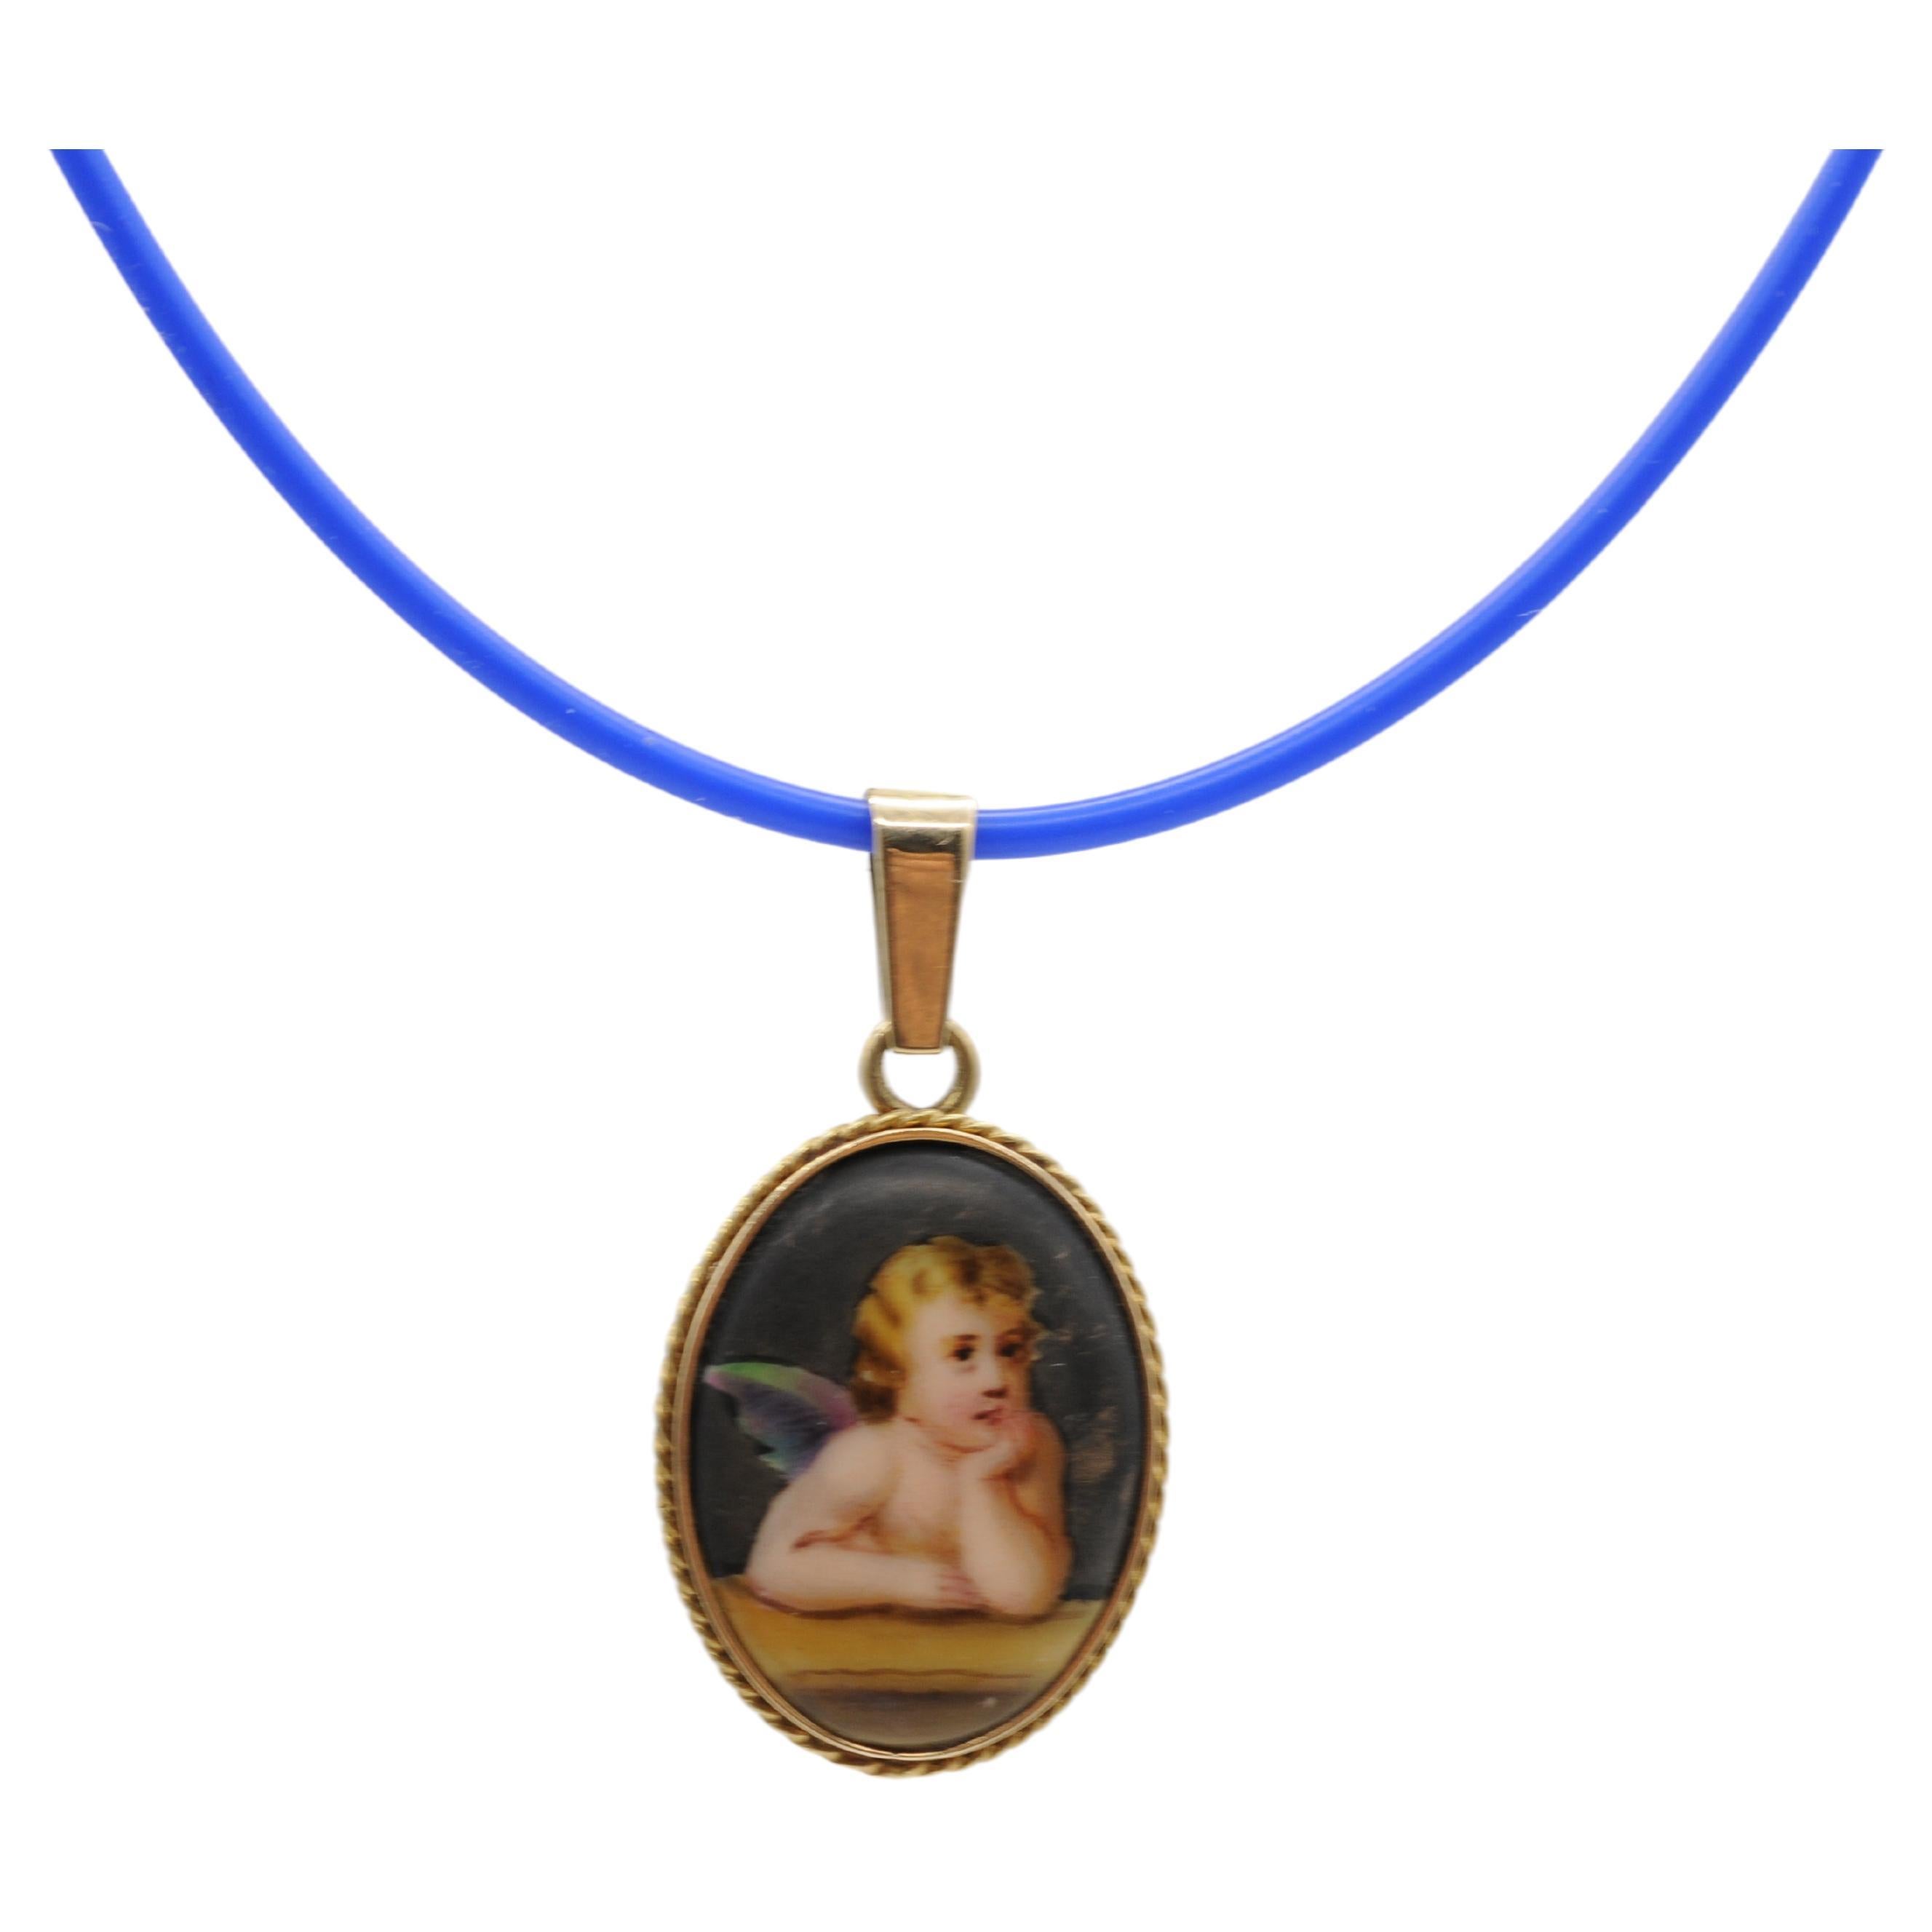 Behold this exquisite pendant, a masterpiece crafted from 14k yellow gold, adorned with a delicate porcelain plate. Hand-painted with intricate detail, it depicts a contemplative cherub, evoking a sense of serenity and introspection. The